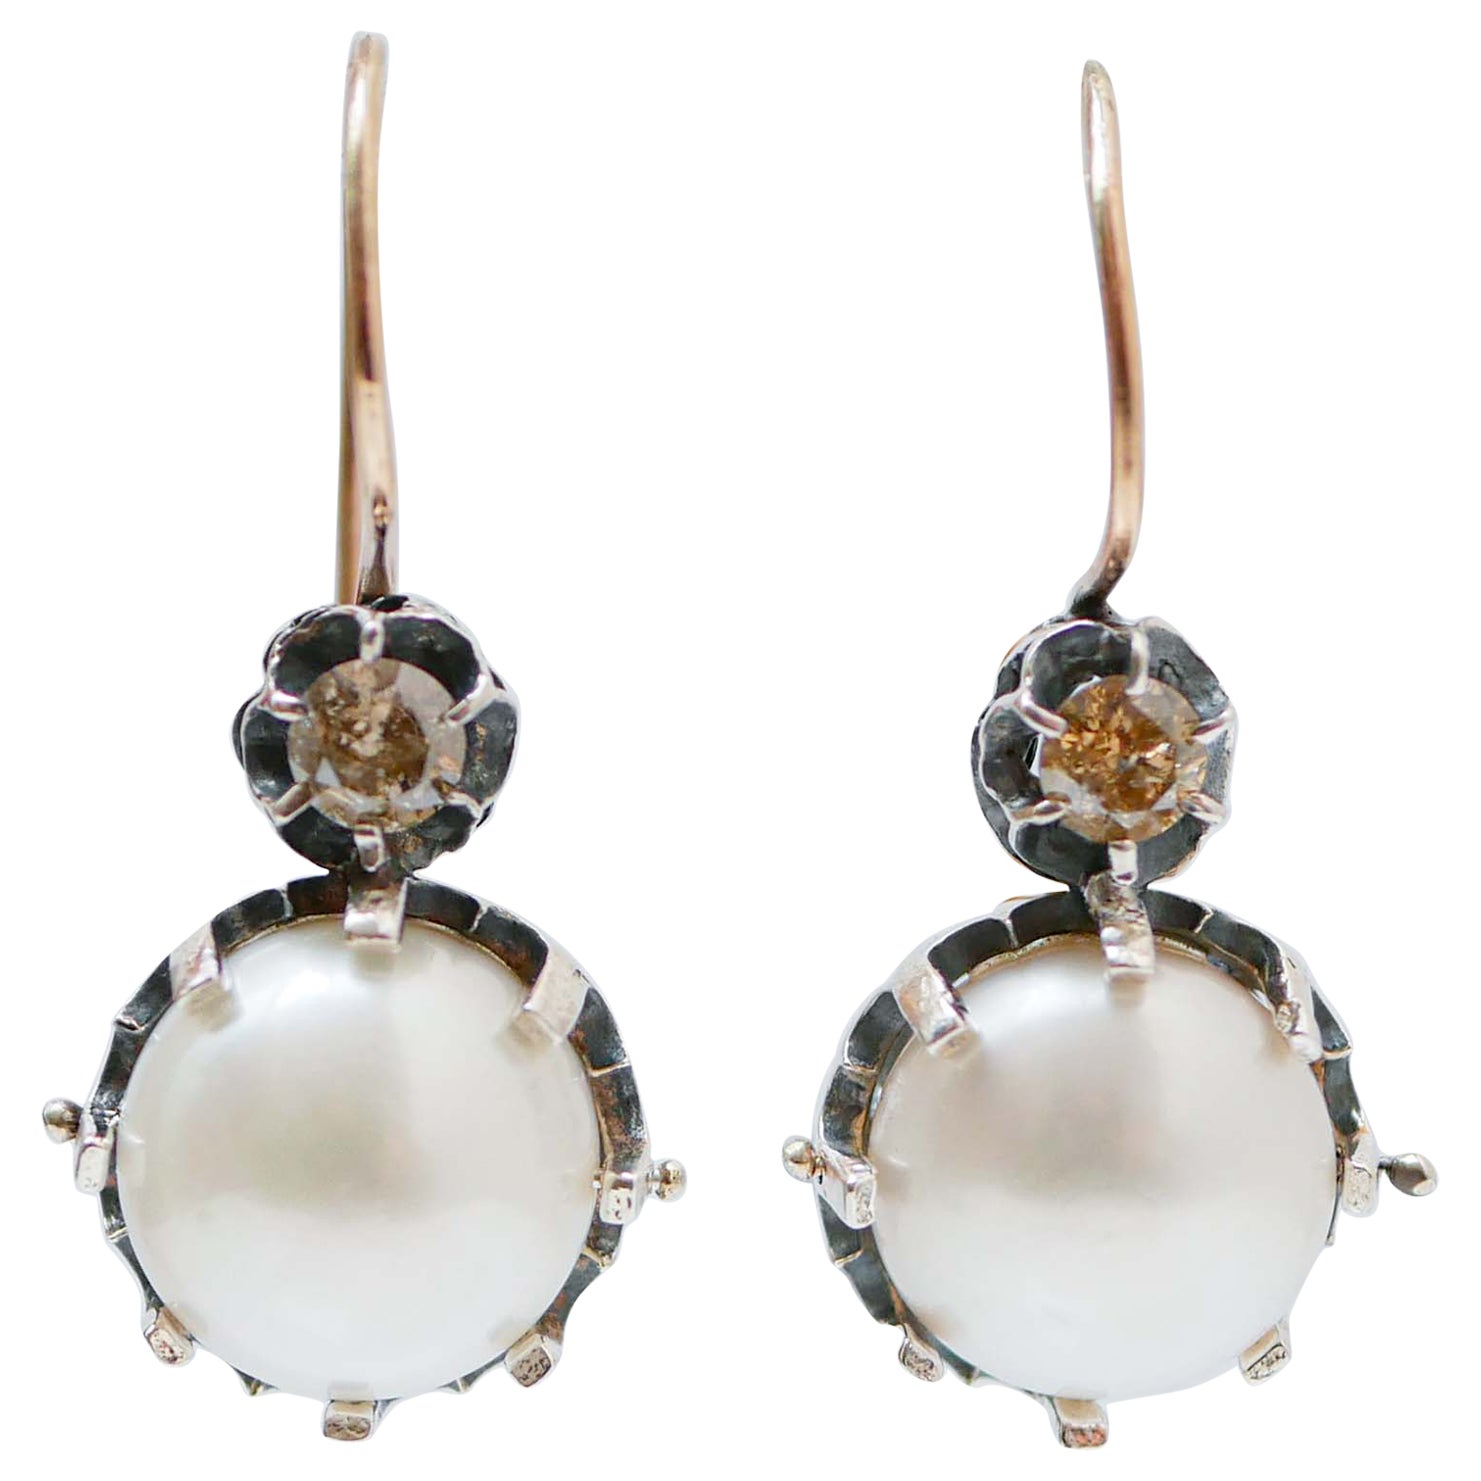 Pearls, Brown Diamonds, Rose Gold and Silver Dangle Earrings.